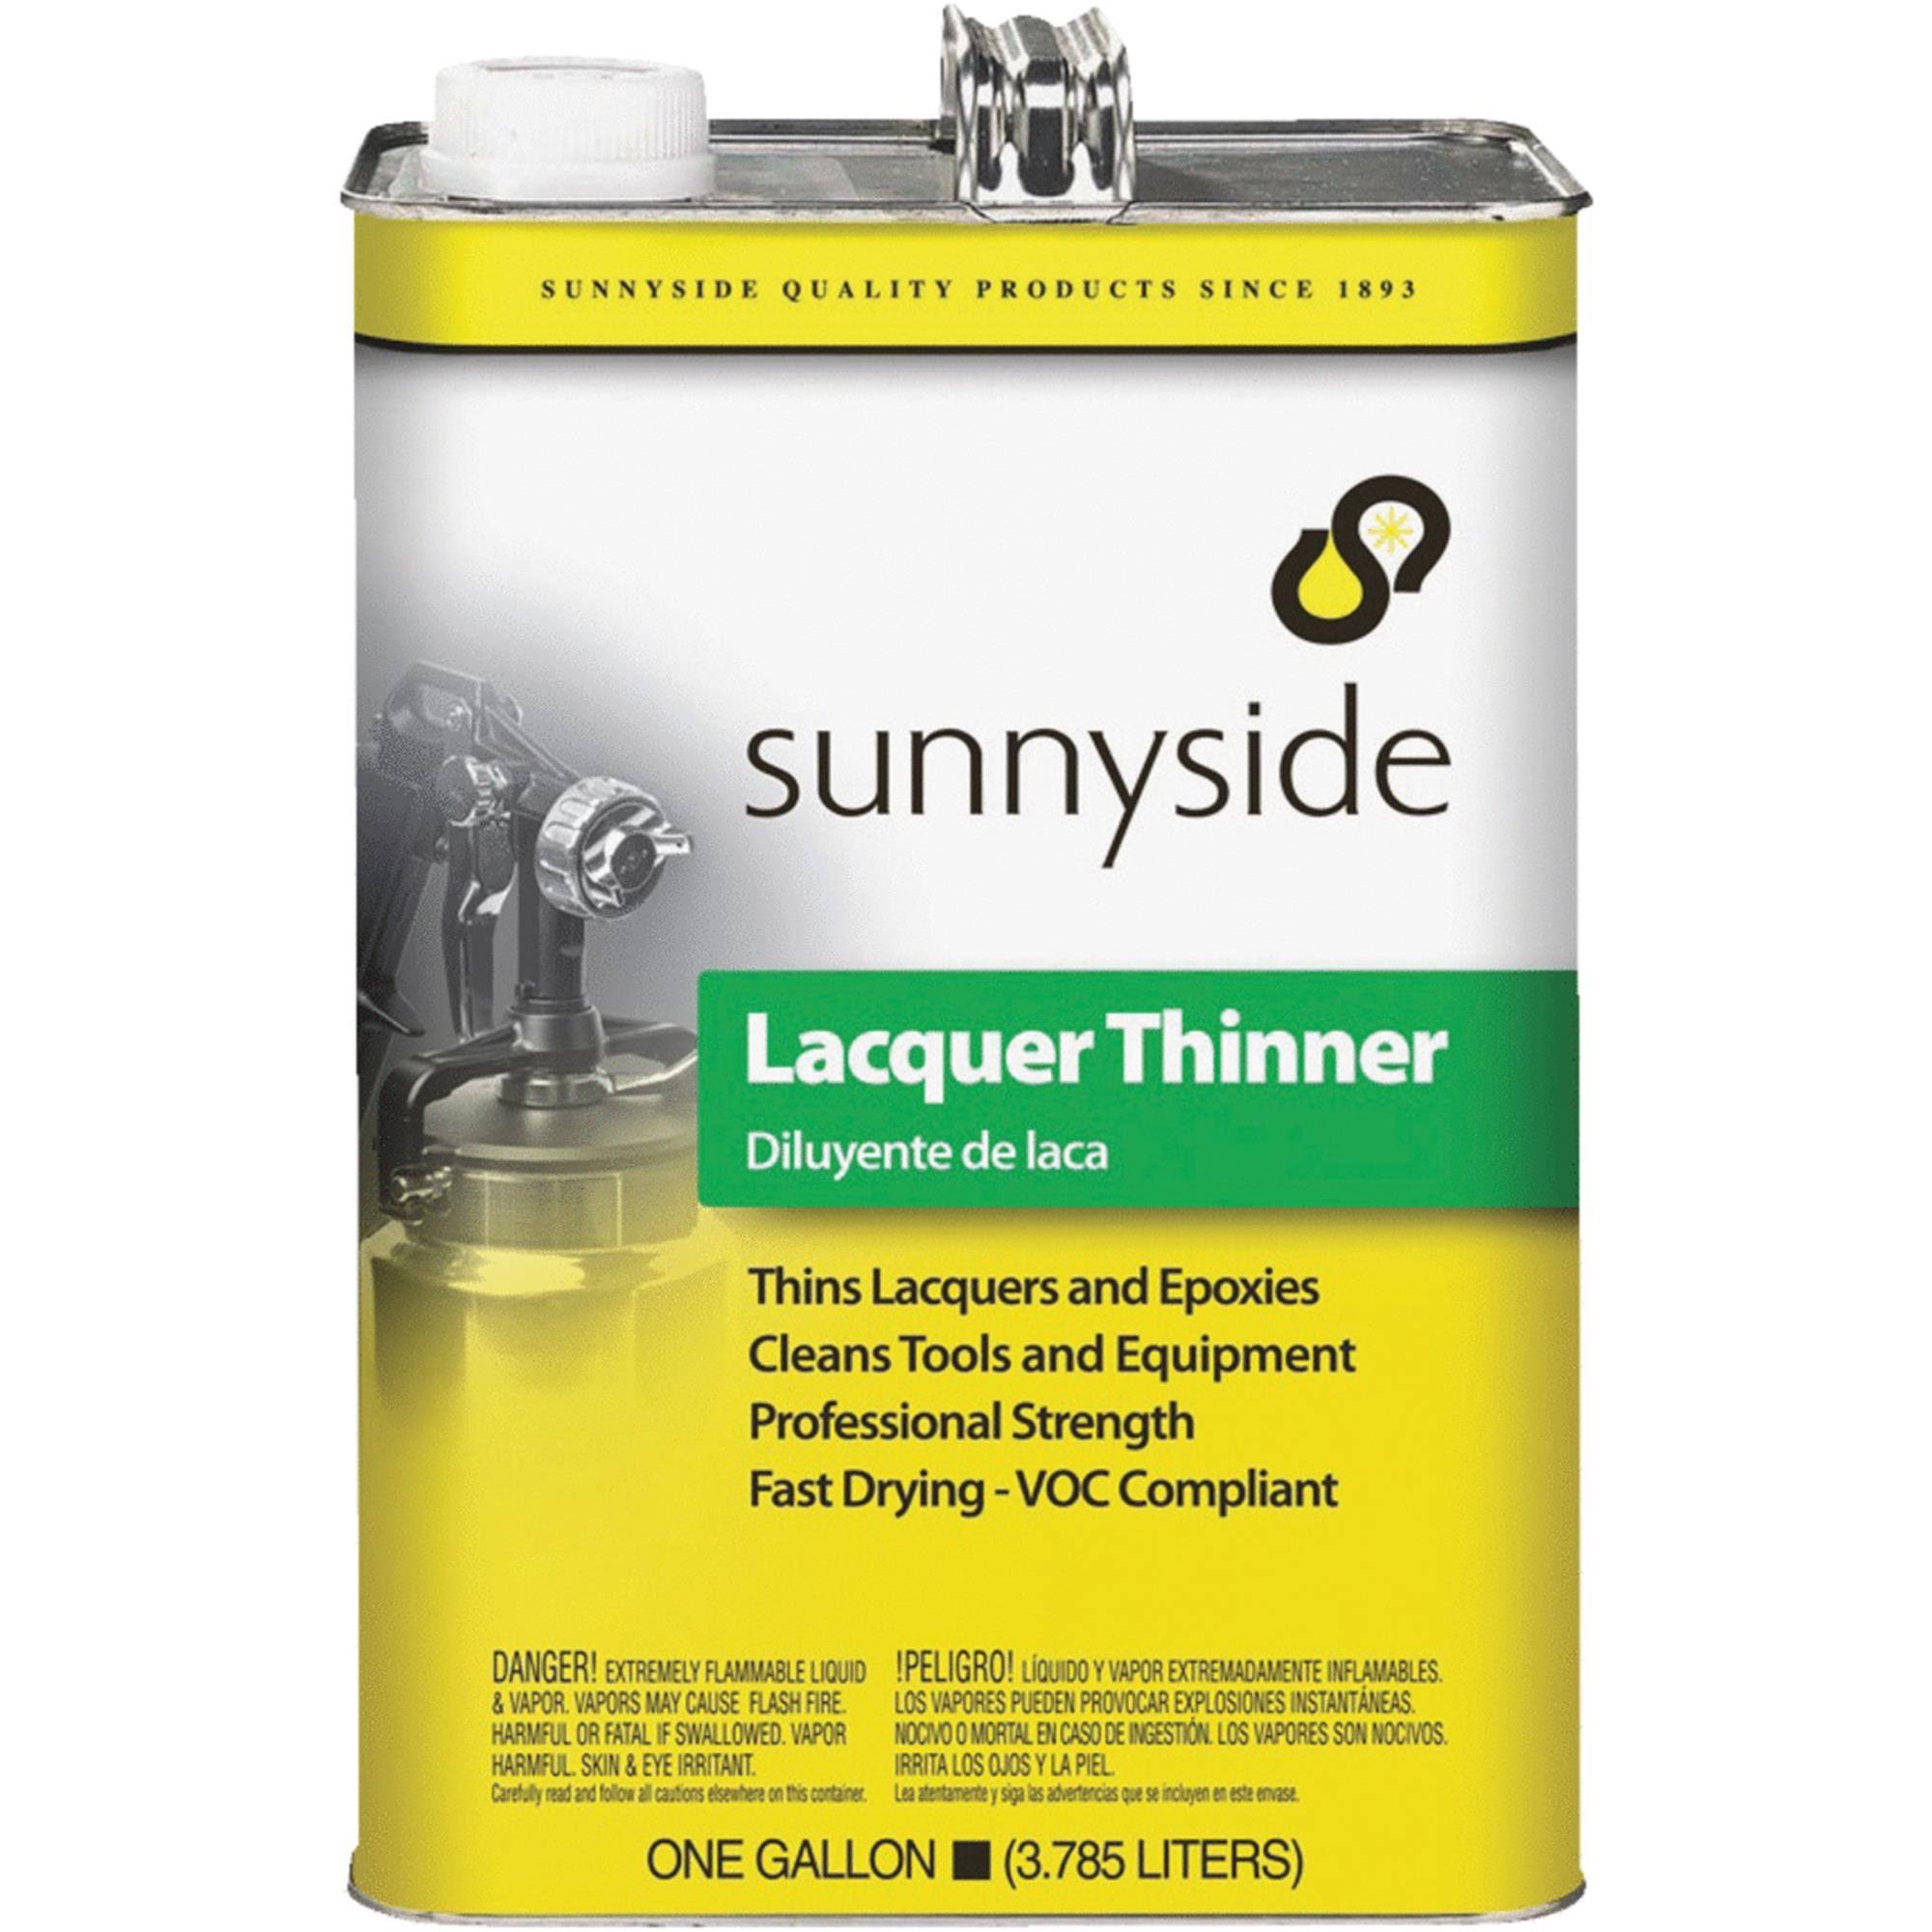 Sunnyside 477G1 Lacquer Thinner, 3.8L | Garage | 30 Day Money Back Guarantee | Free Shipping on All Orders | Delivery Guaranteed